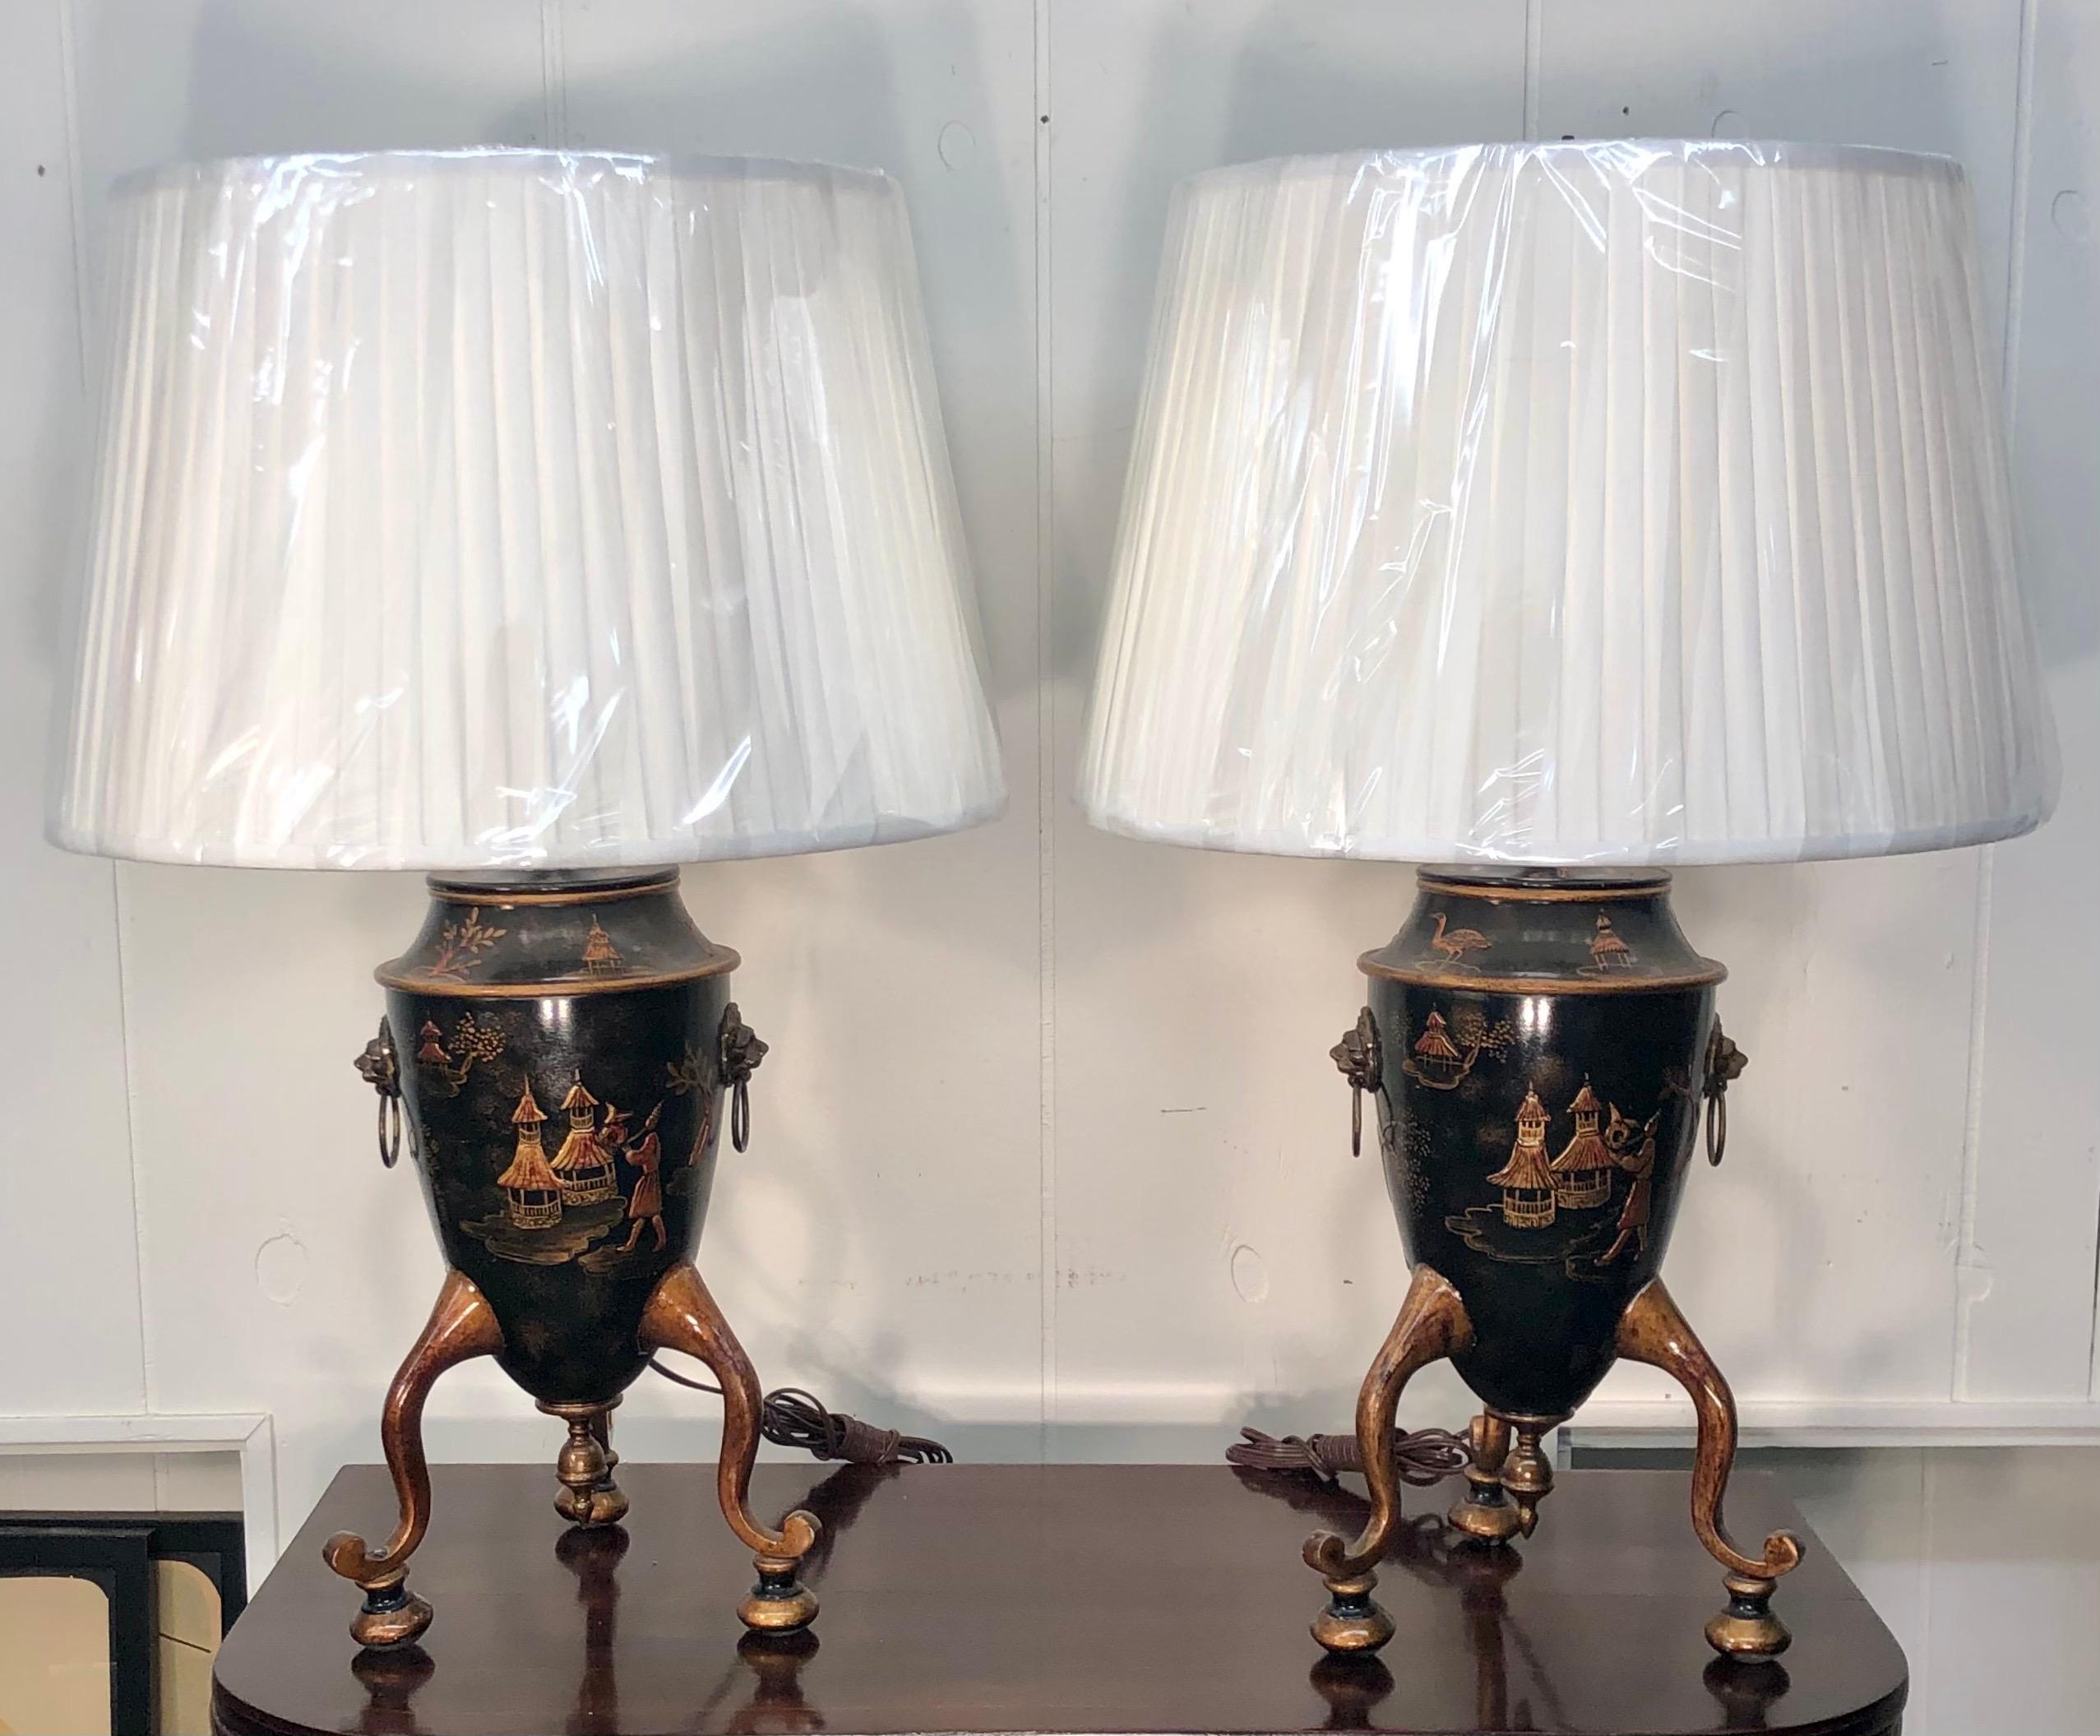 Elegant pair of Georgian style Chinoiserie tole urns, made into Lamps.
Shade is 20 inches Diameter.